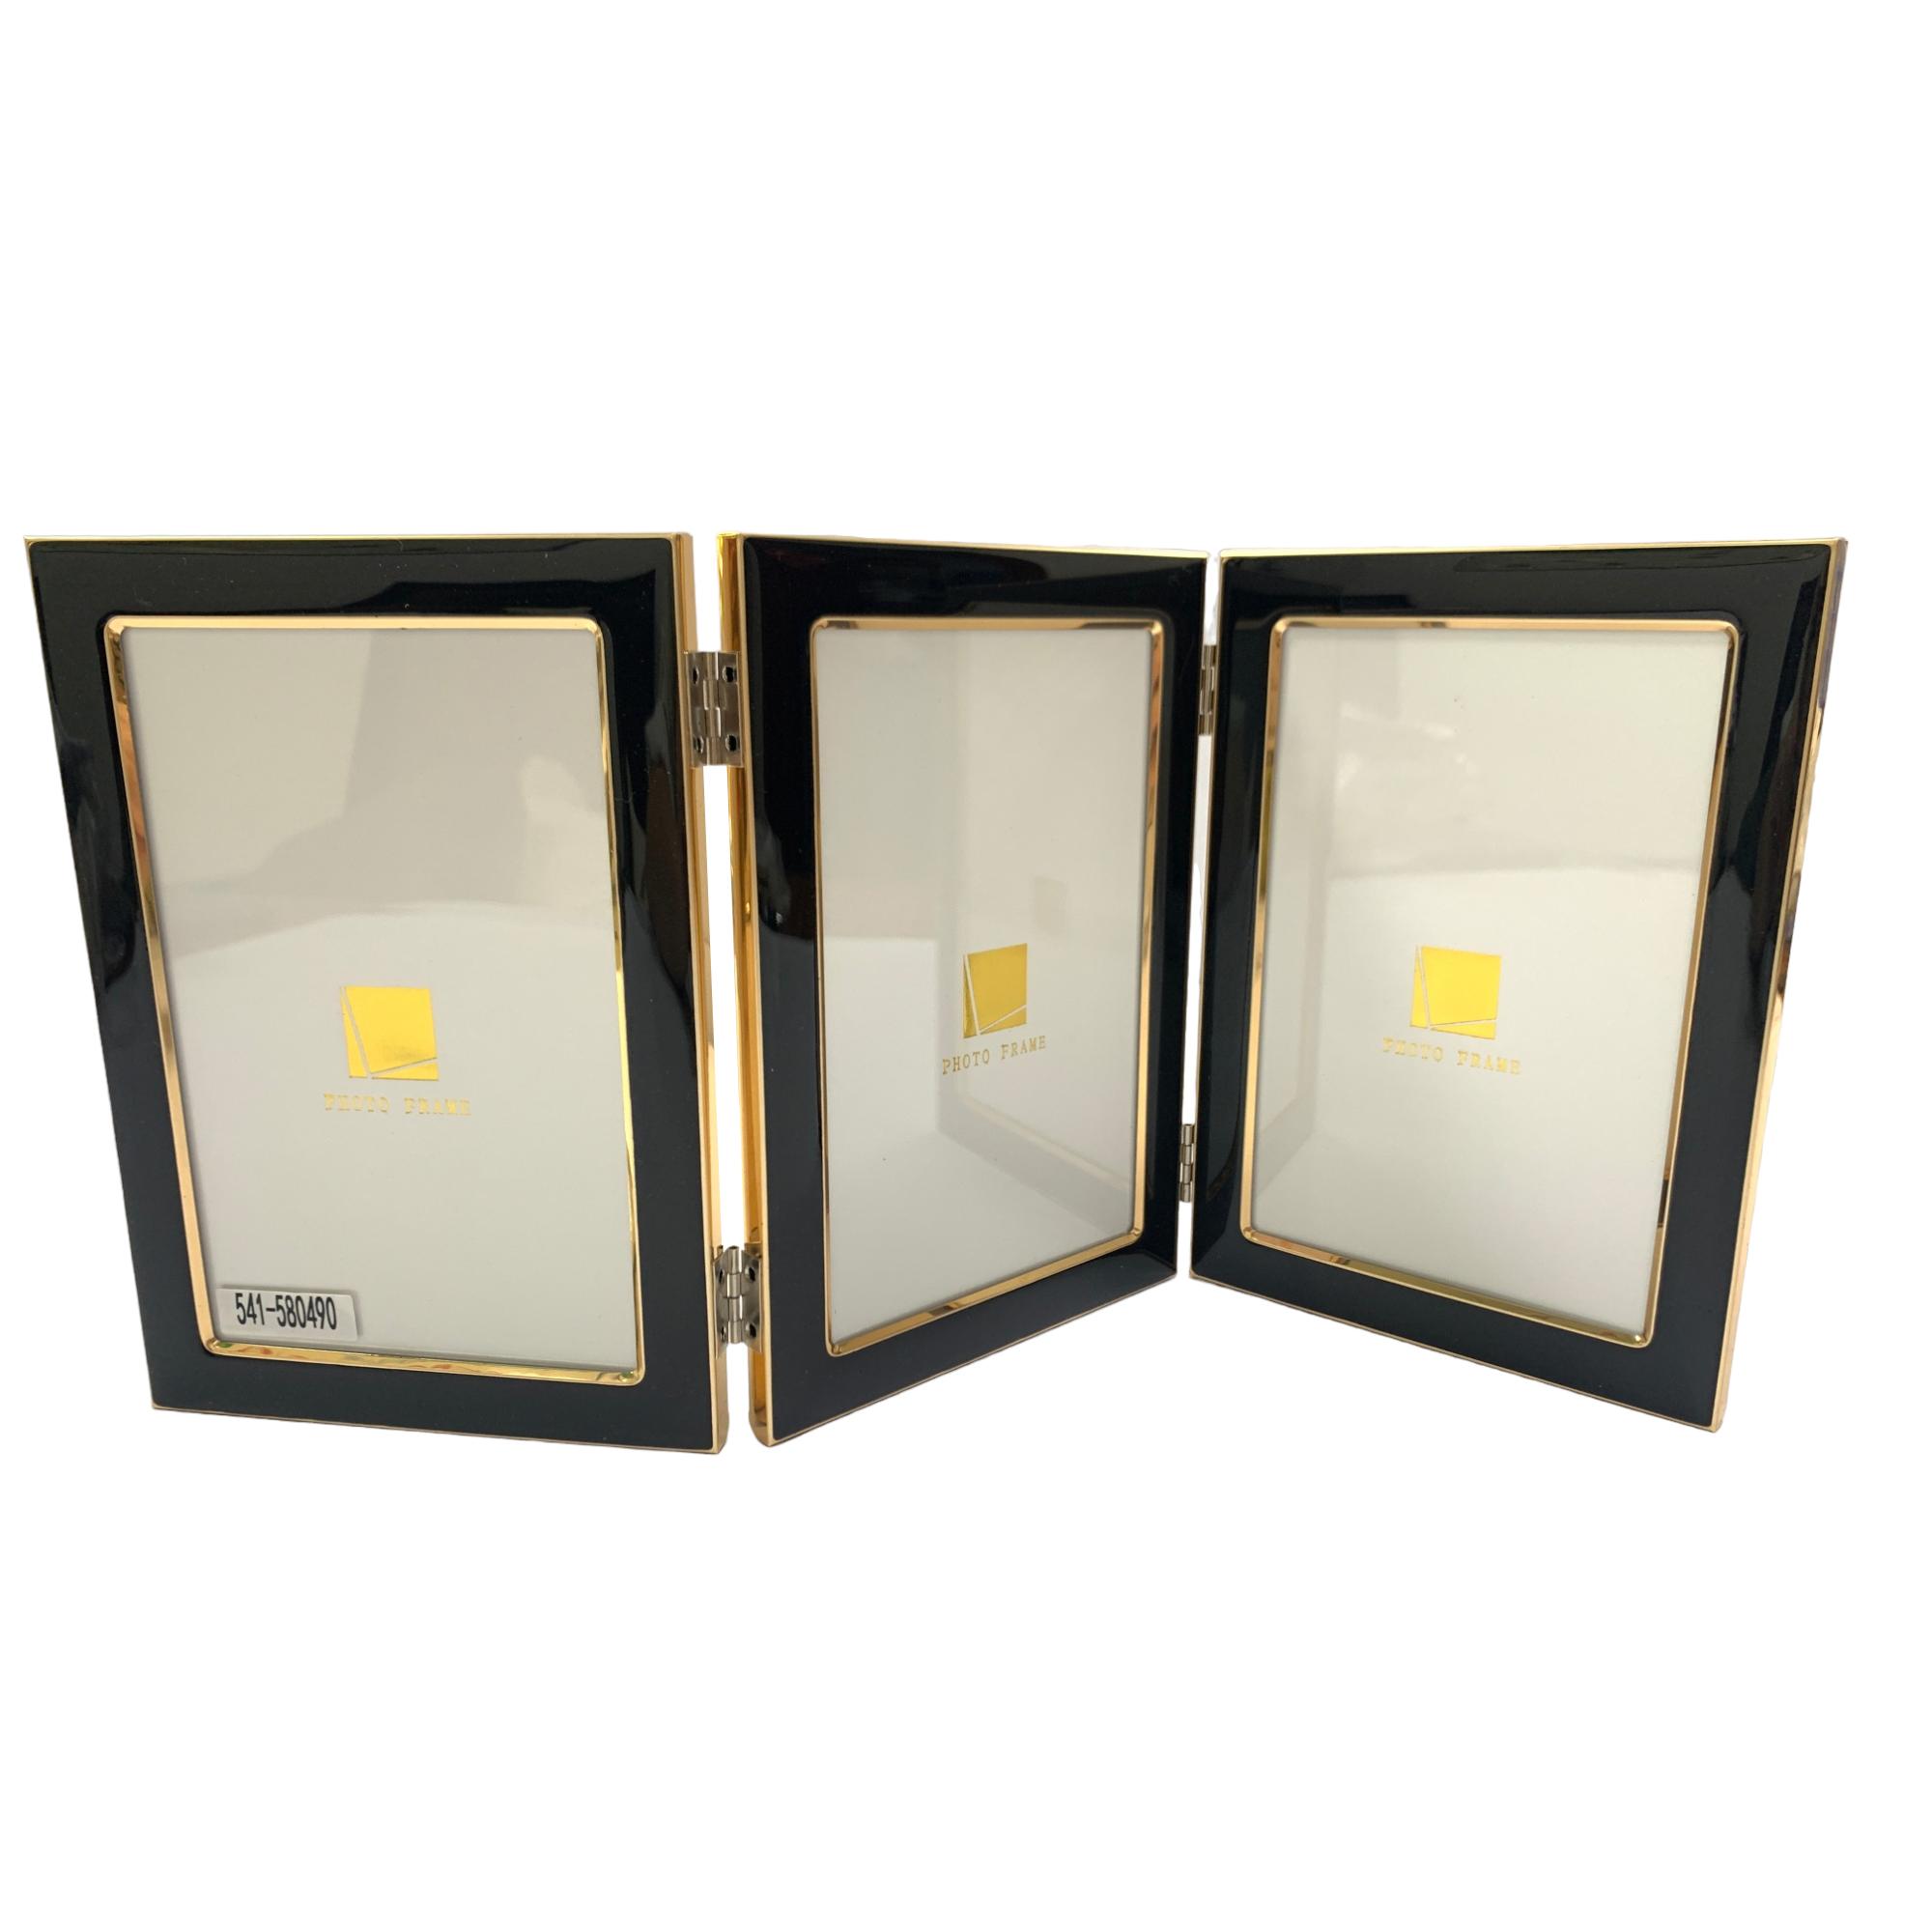 PICTURE FRAME 3 - 4 X 6 17.6 X 12.6 X - 541-580490